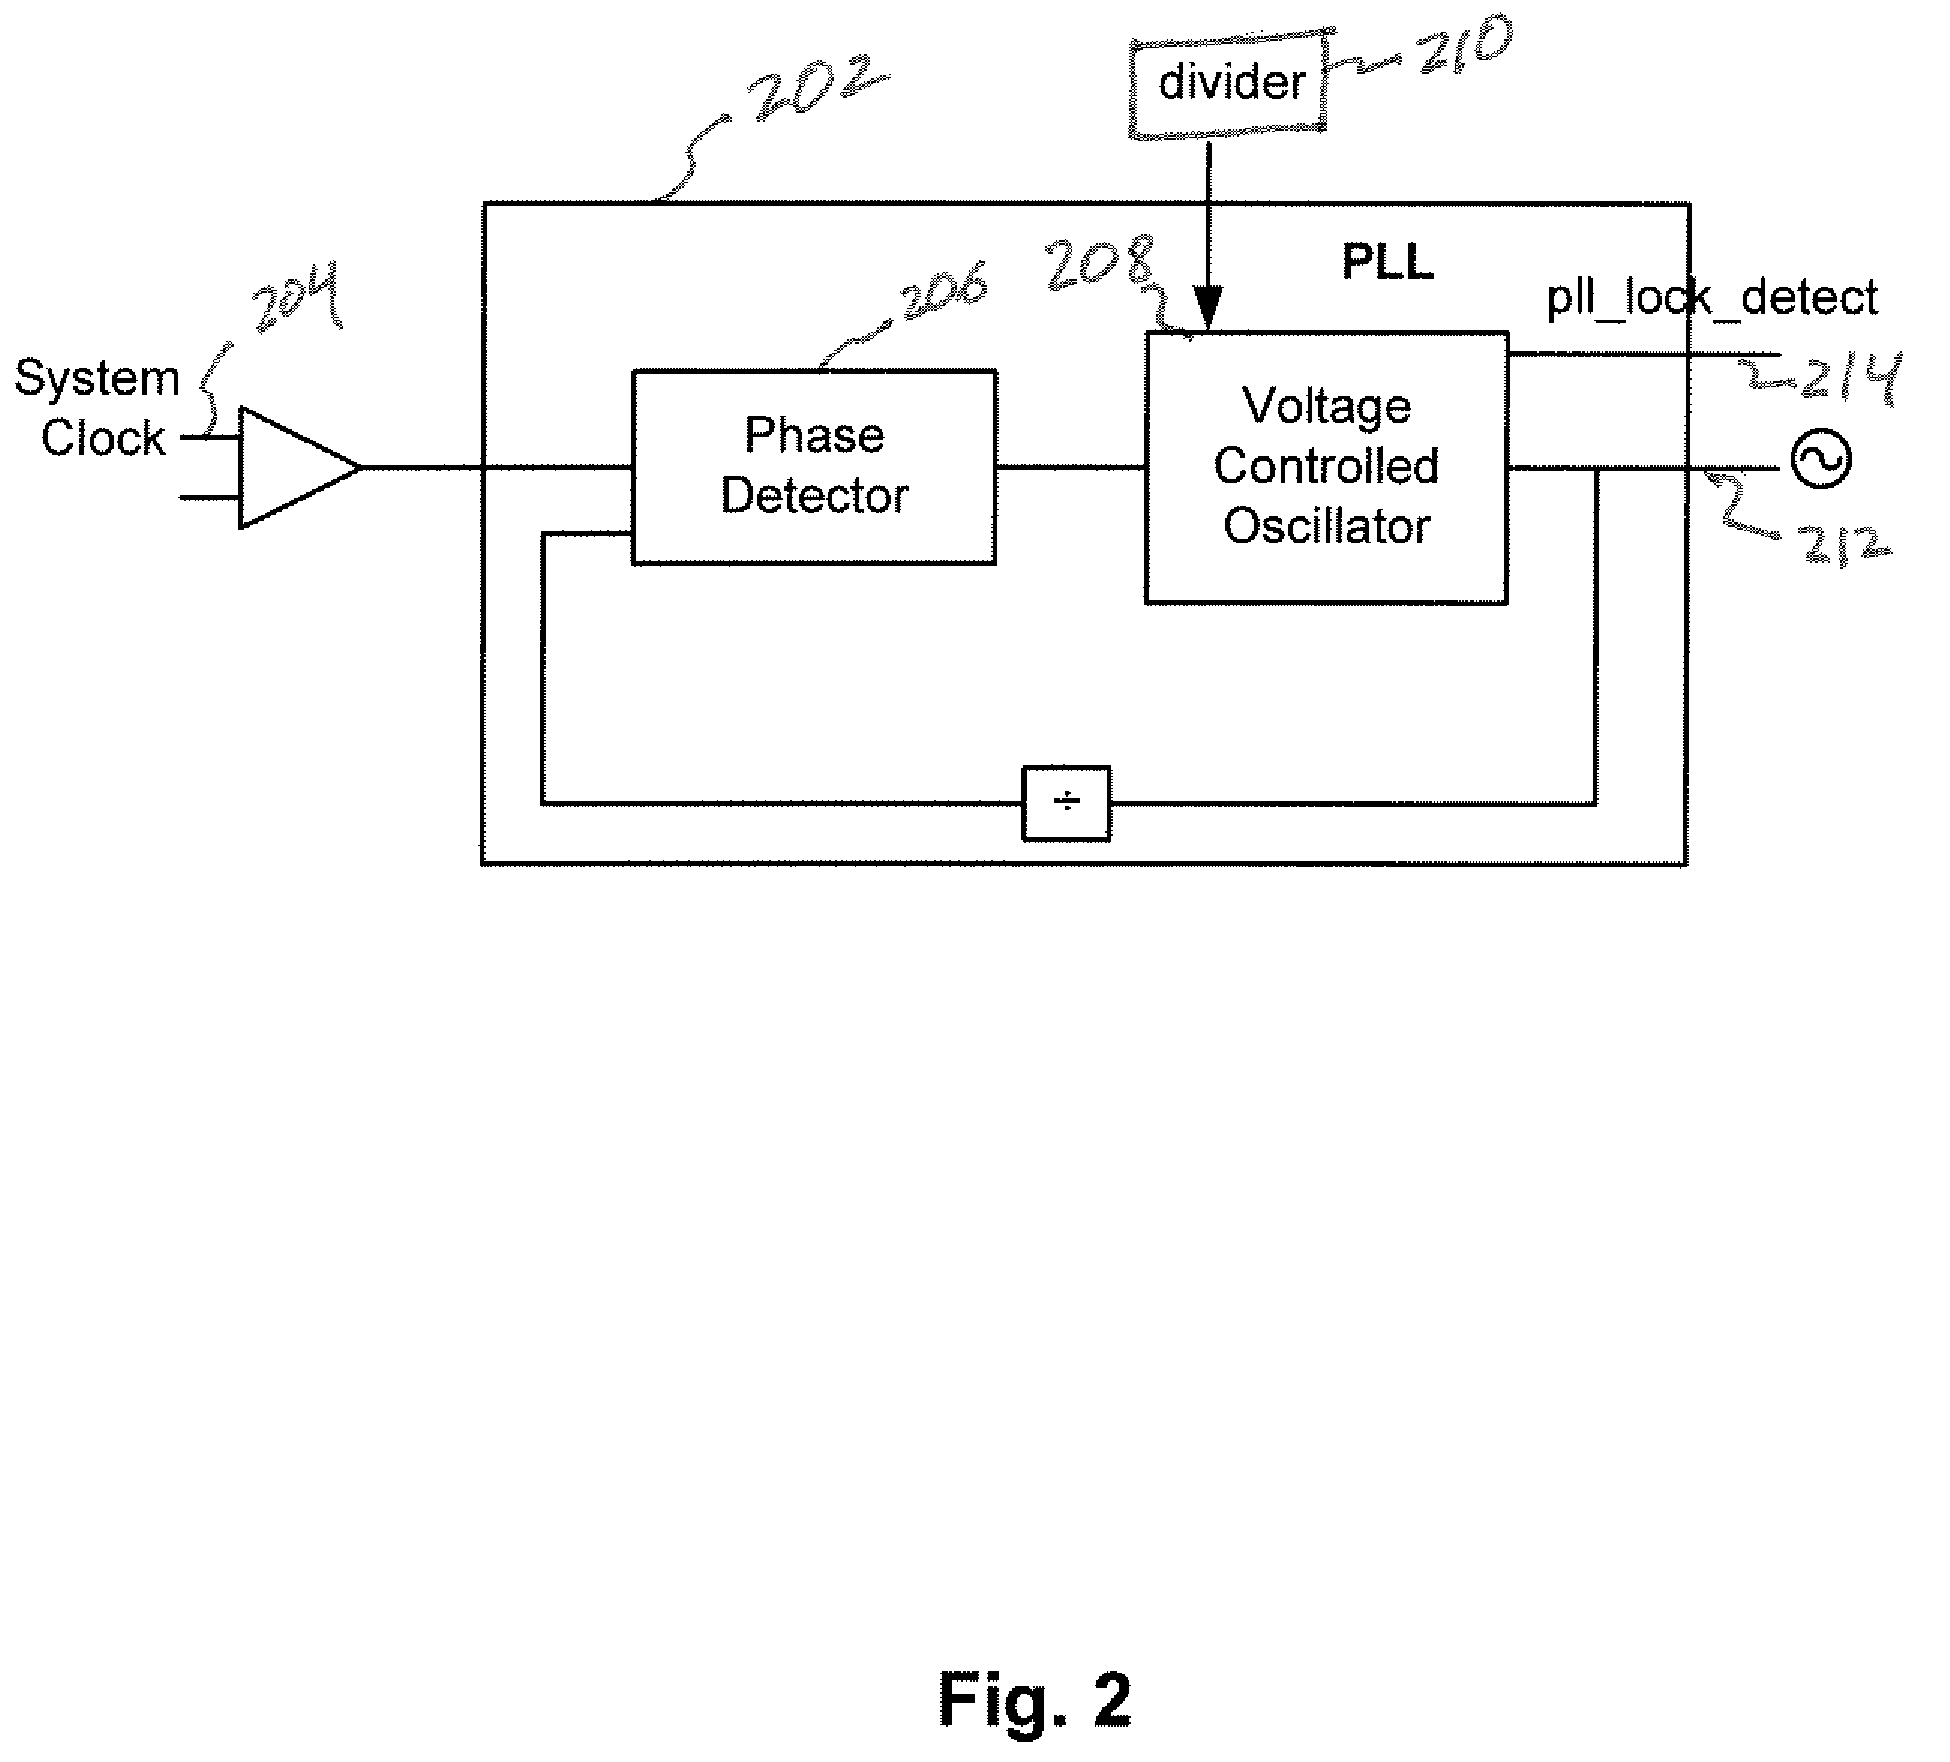 Method and apparatus to generate system clock synchronization pulses using a PLL lock detect signal